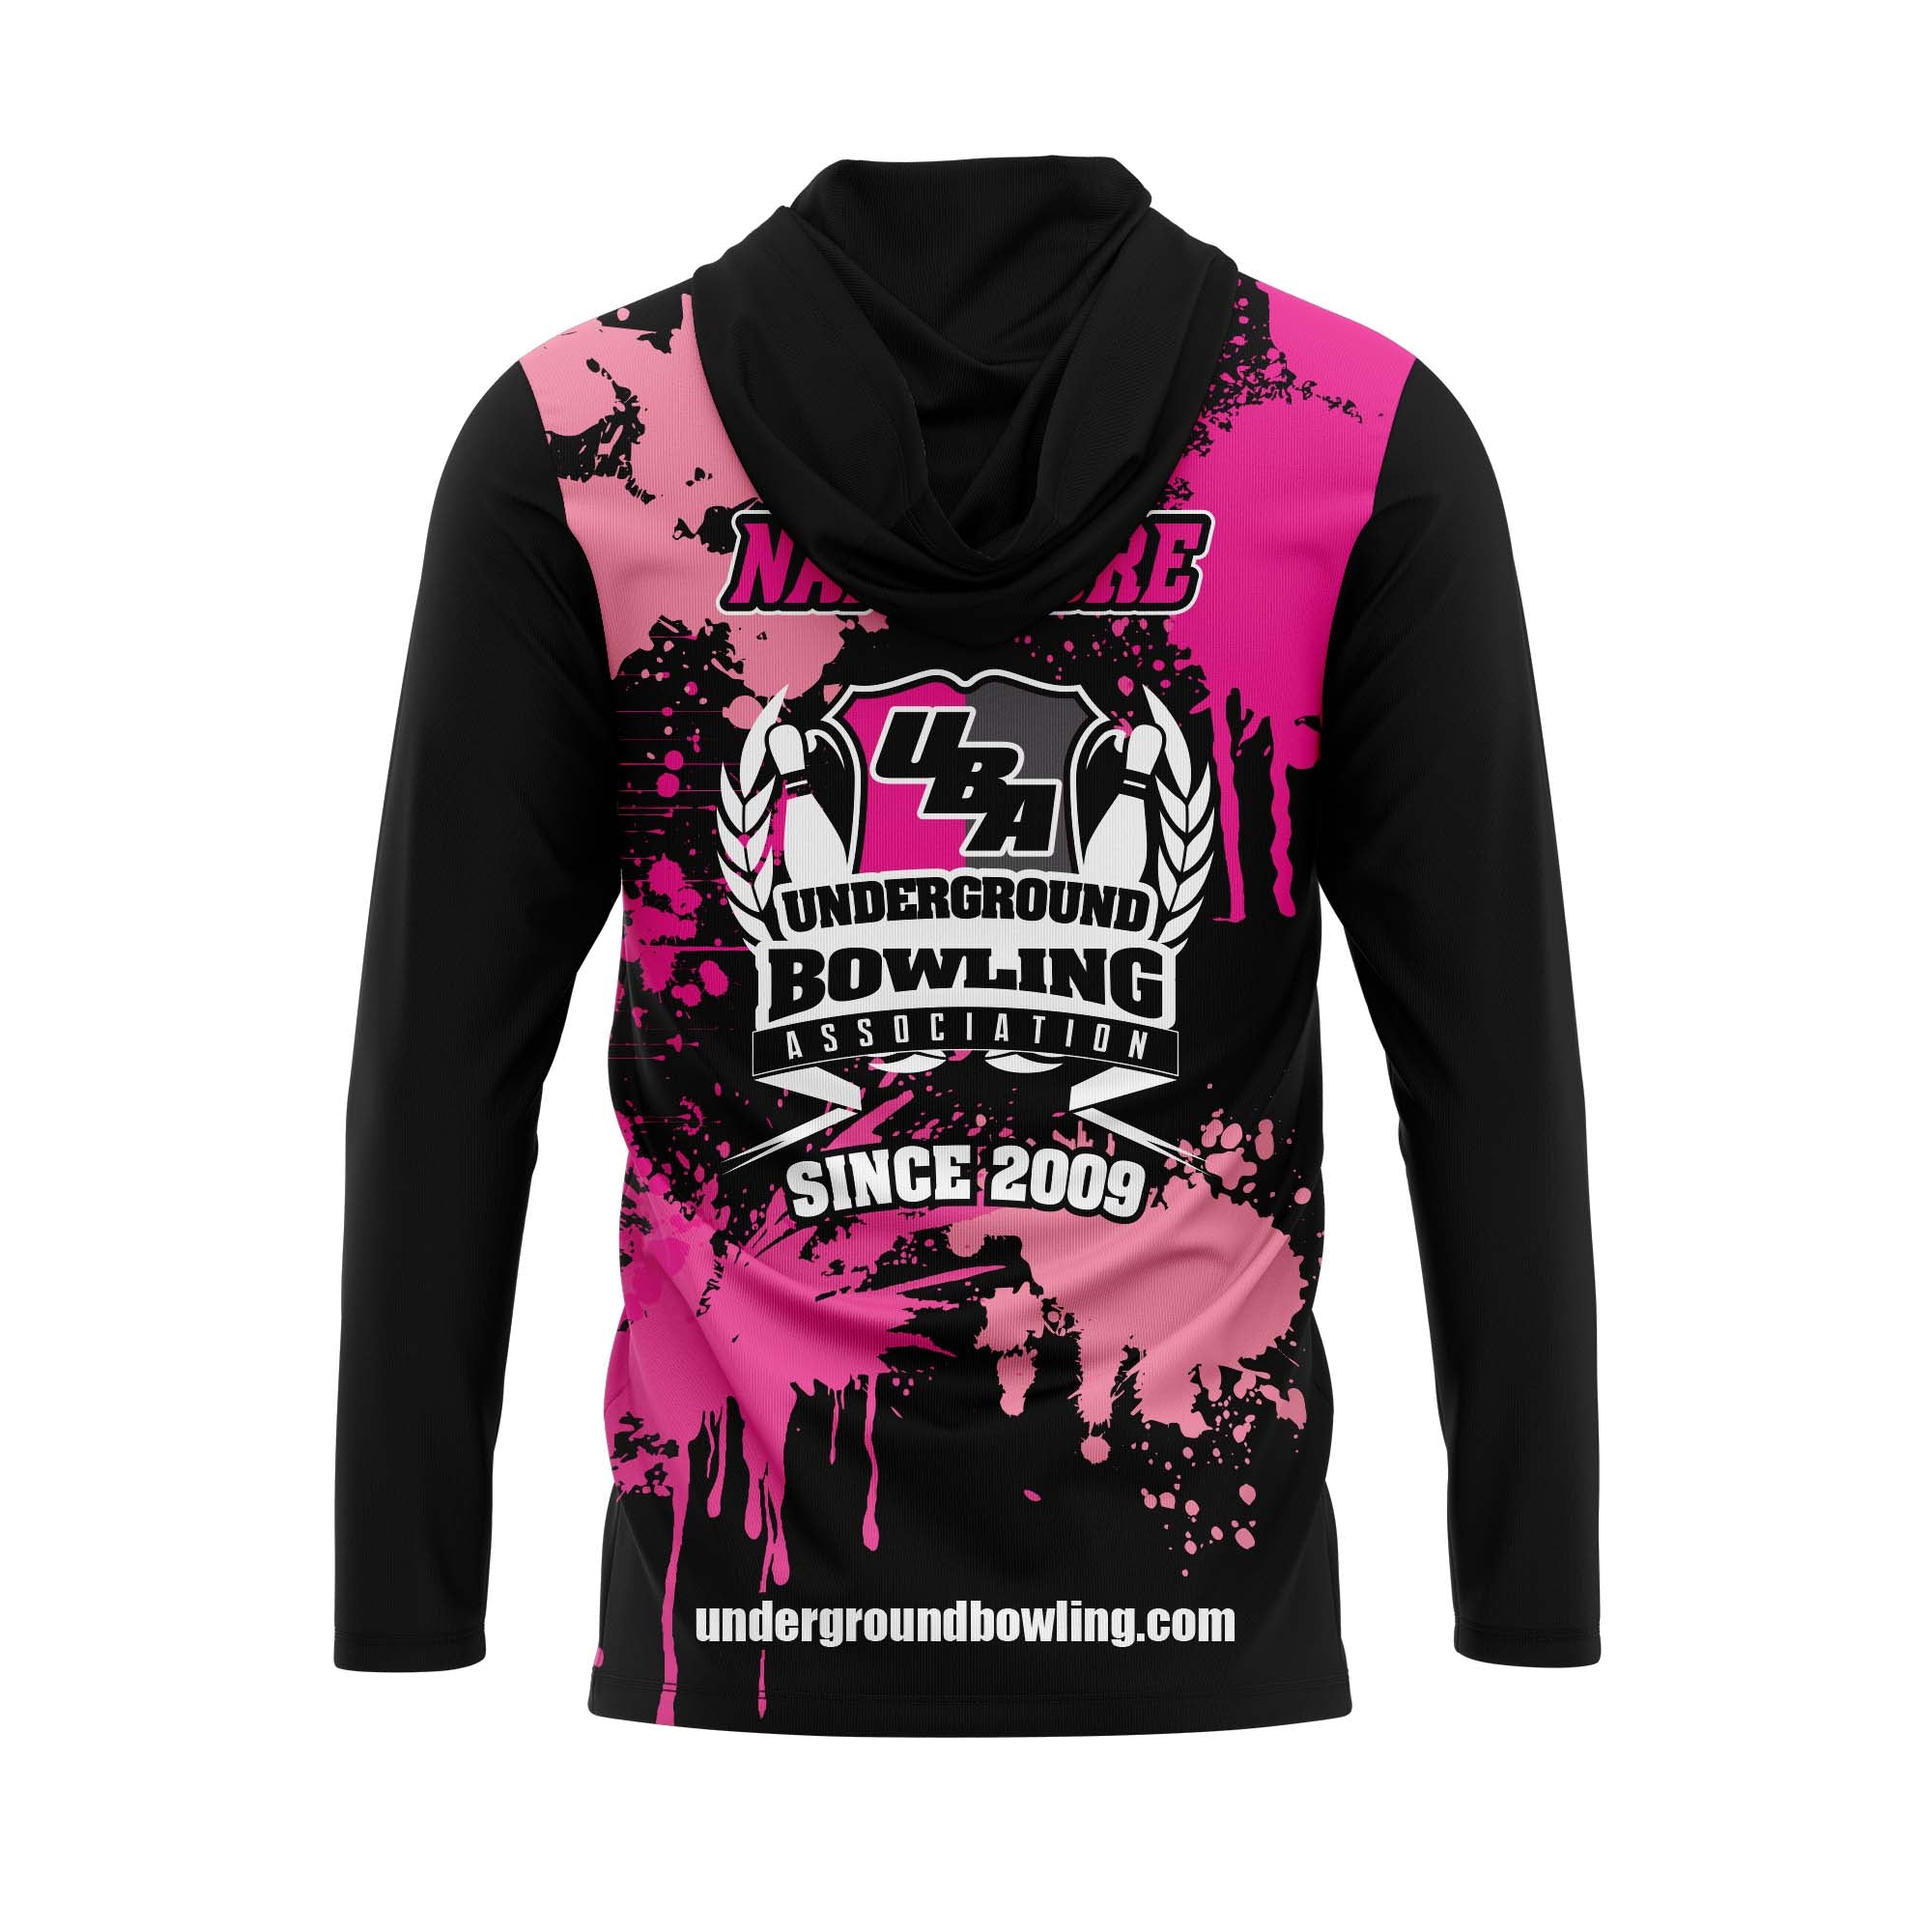 Striking Vipers Breast Cancer Jersey